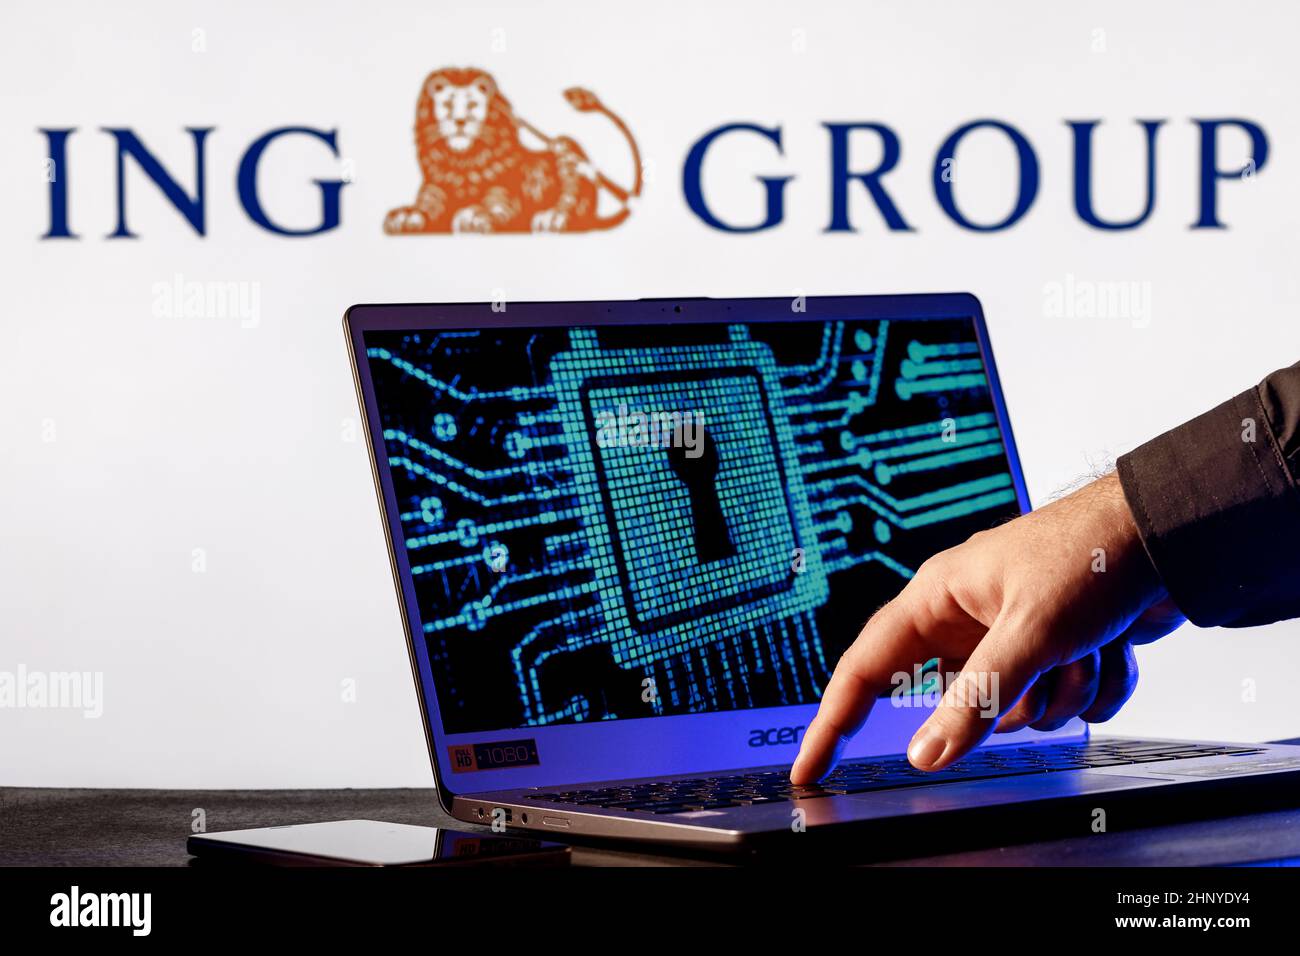 Laptop with lock symbol on screen on background of  ING Group logo. Finger points to lock symbol. Concept of data hacking. Stock Photo